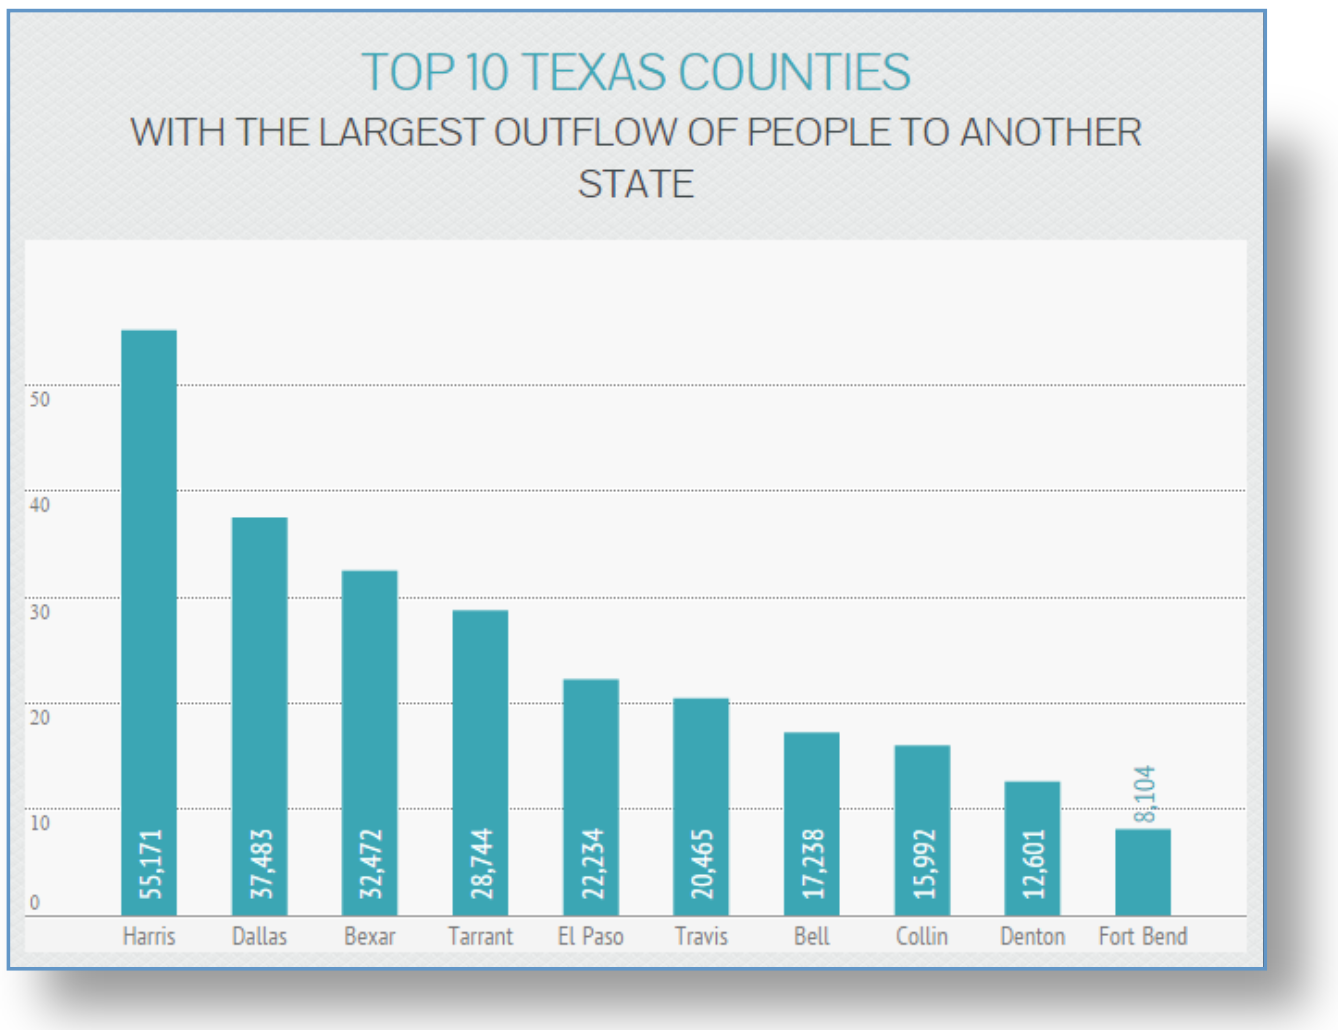 top 10 Texas counties with largest outflows to another state